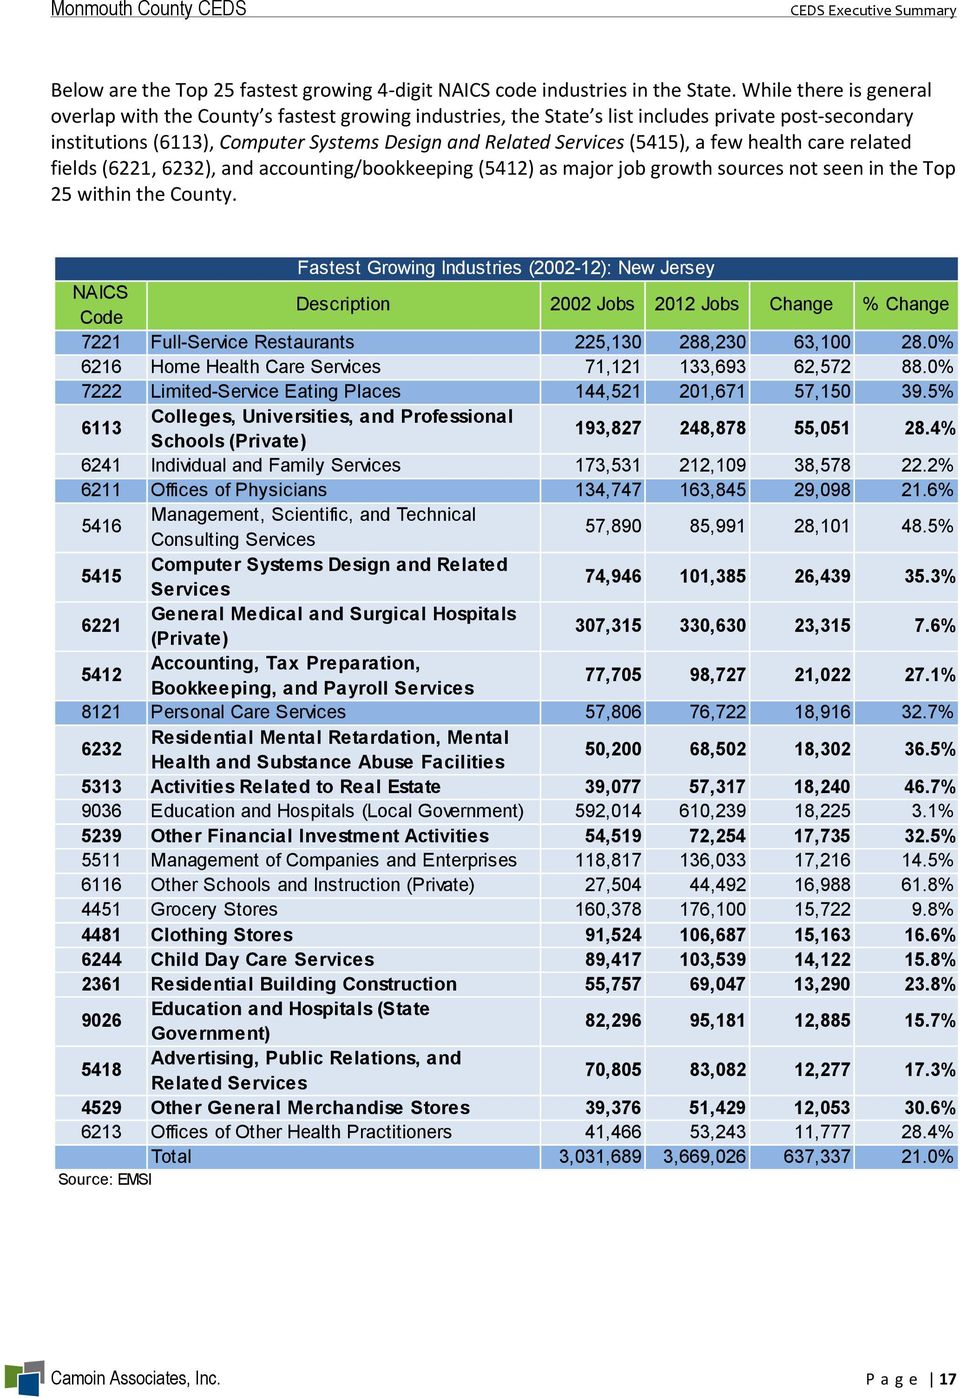 a few health care related fields (6221, 6232), and accounting/bookkeeping (5412) as major job growth sources not seen in the Top 25 within the County.